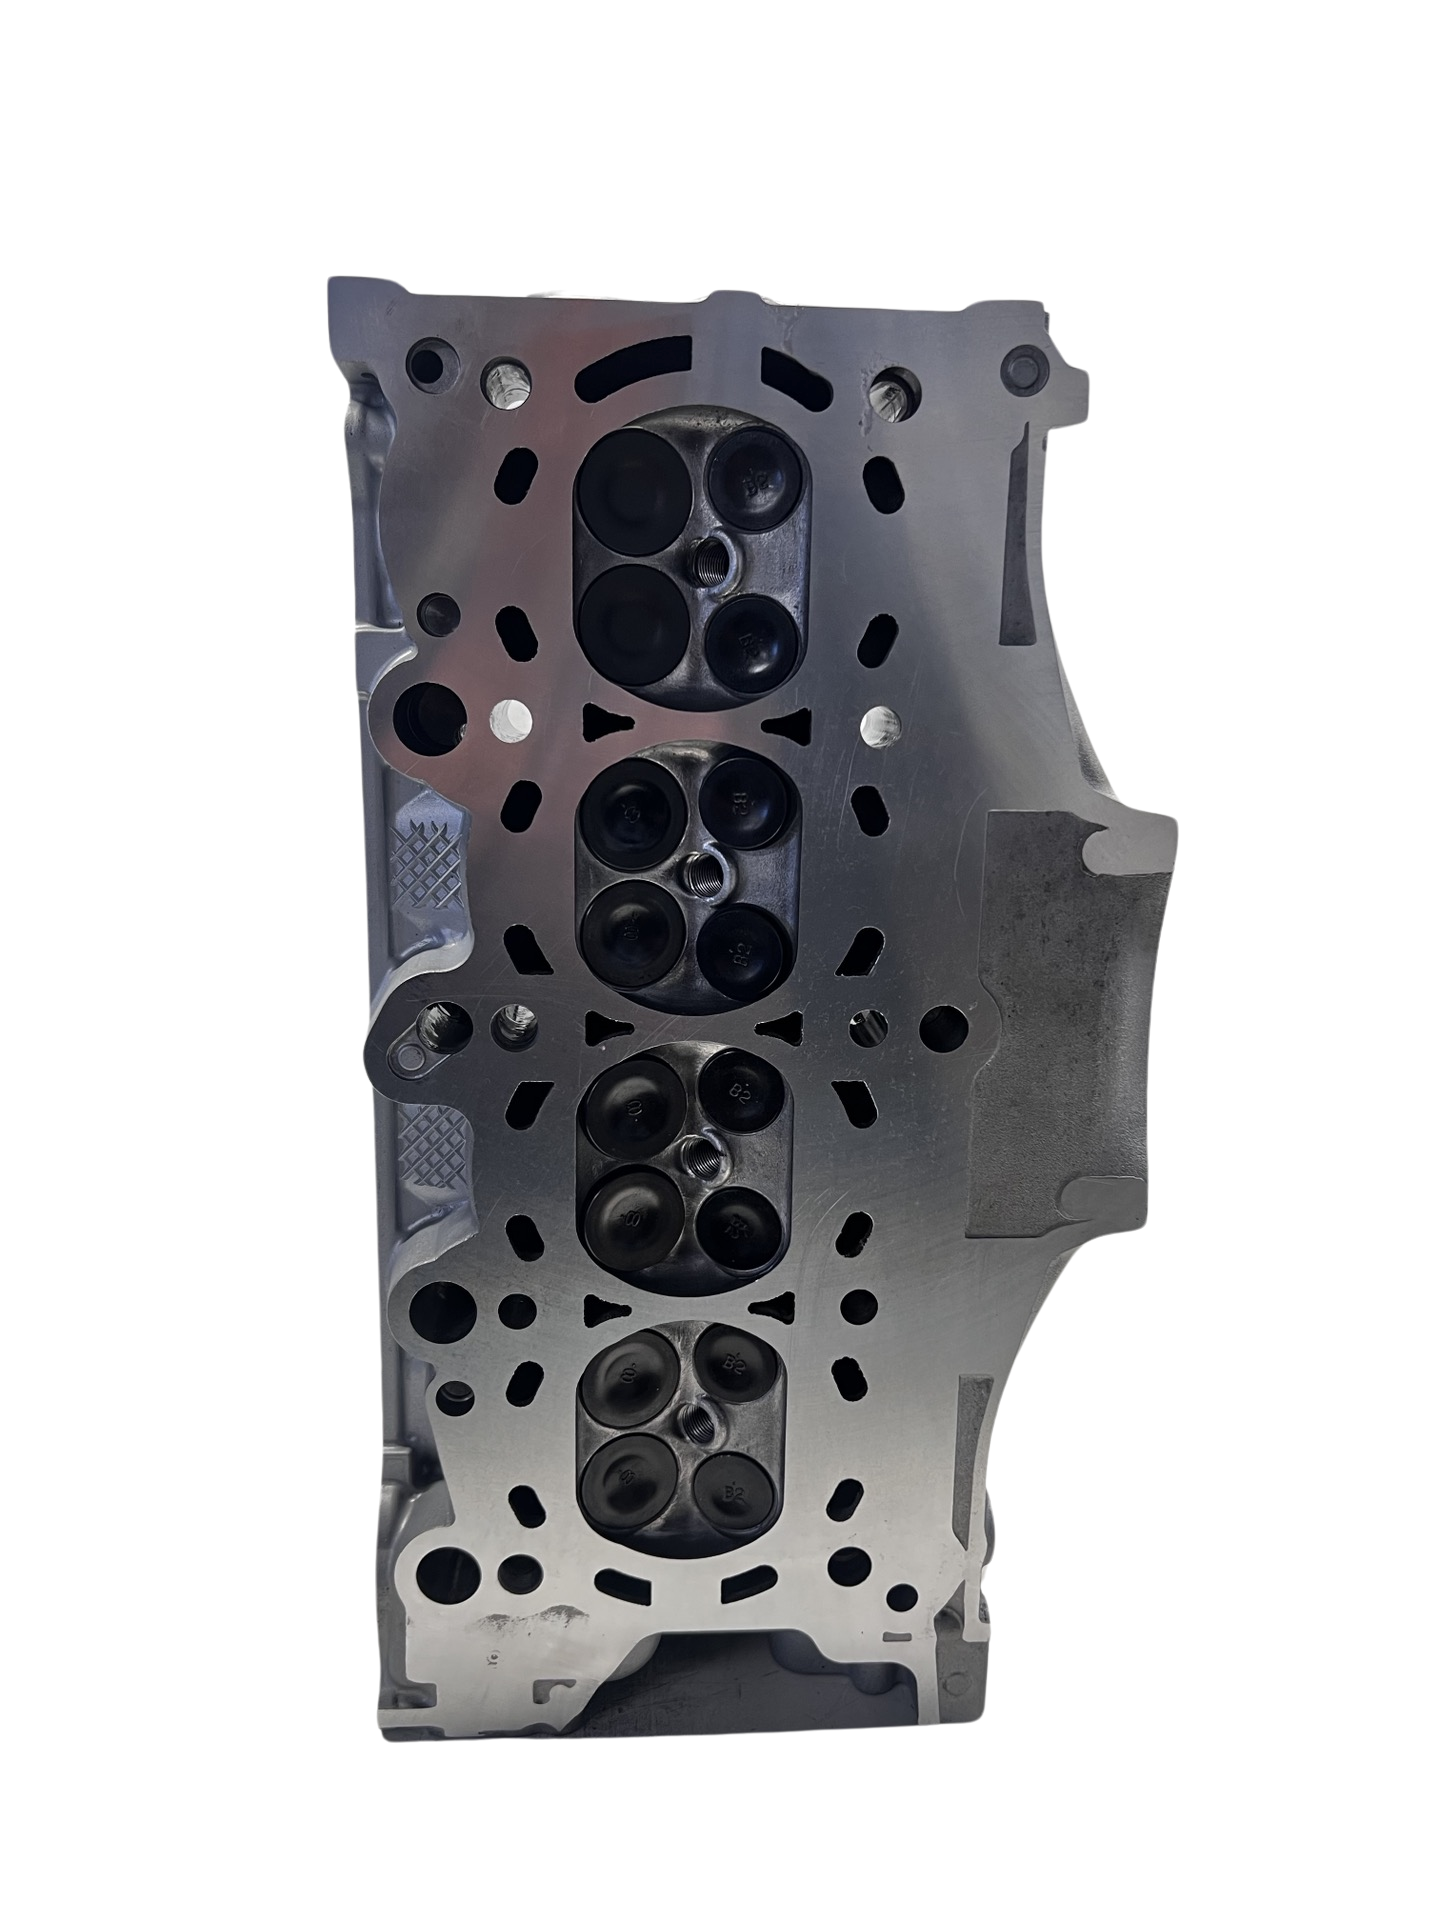 Bottom view of cylinder head for a Honda Civic 1.8L Casting #RNA